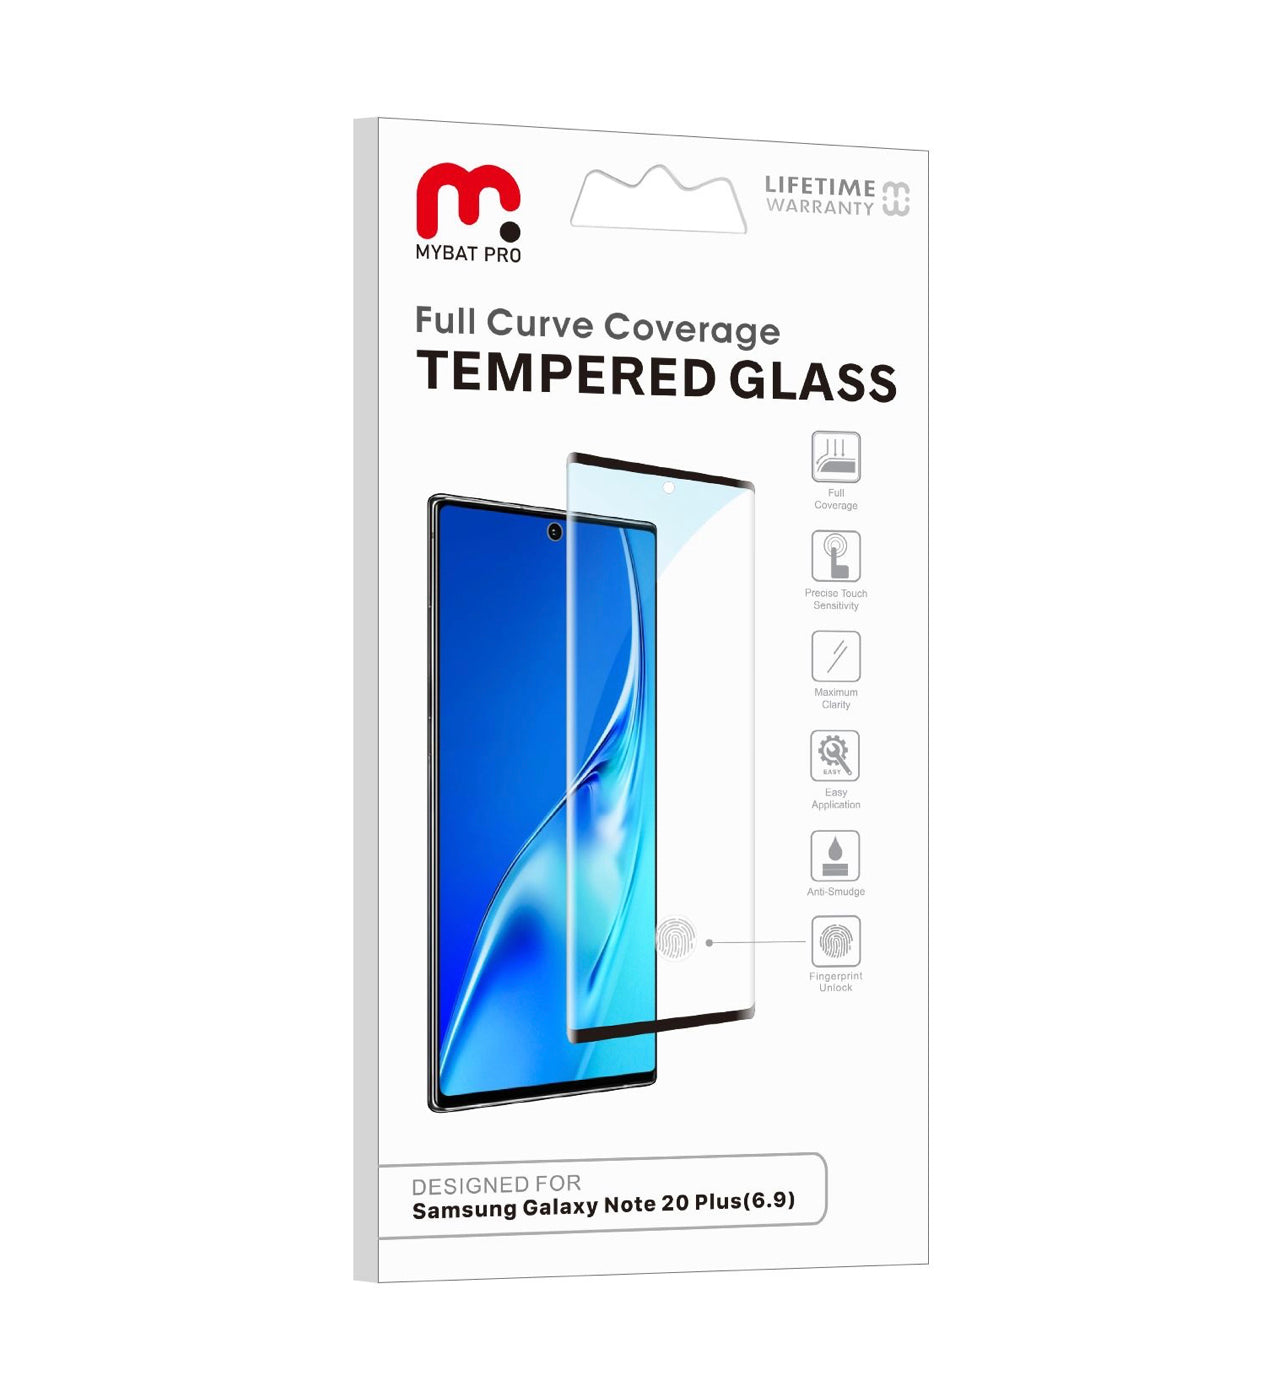 MYBAT PRO FULL CURVE COVERAGE TEMPERED GLASS FOR SAMSUNG GALAXY NOTE 20 ULTRA